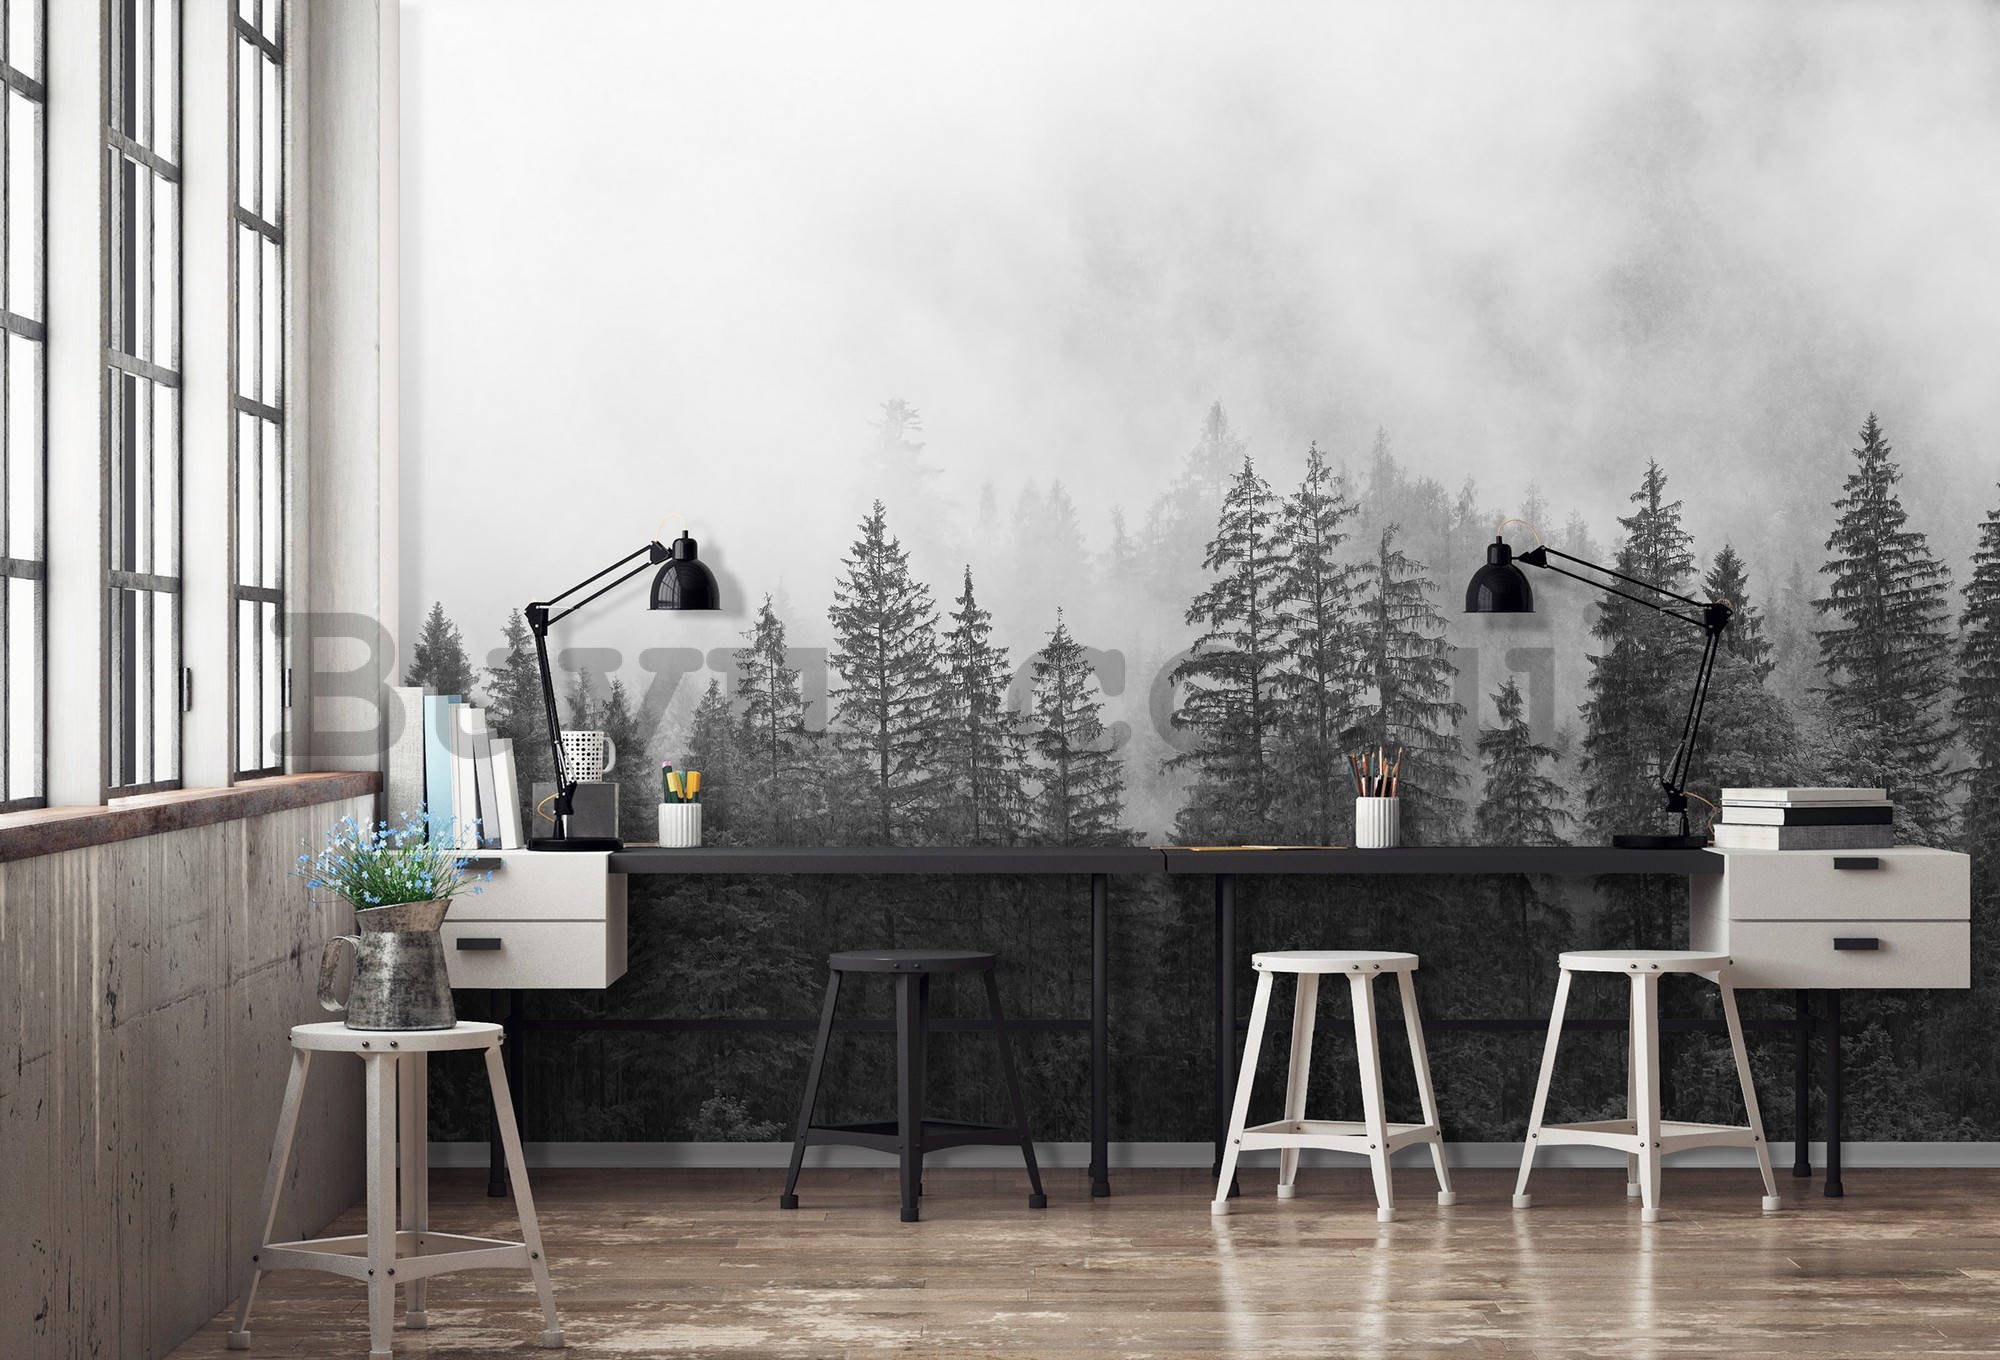 Wall mural vlies: Fog over the black and white forest - 152,5x104 cm